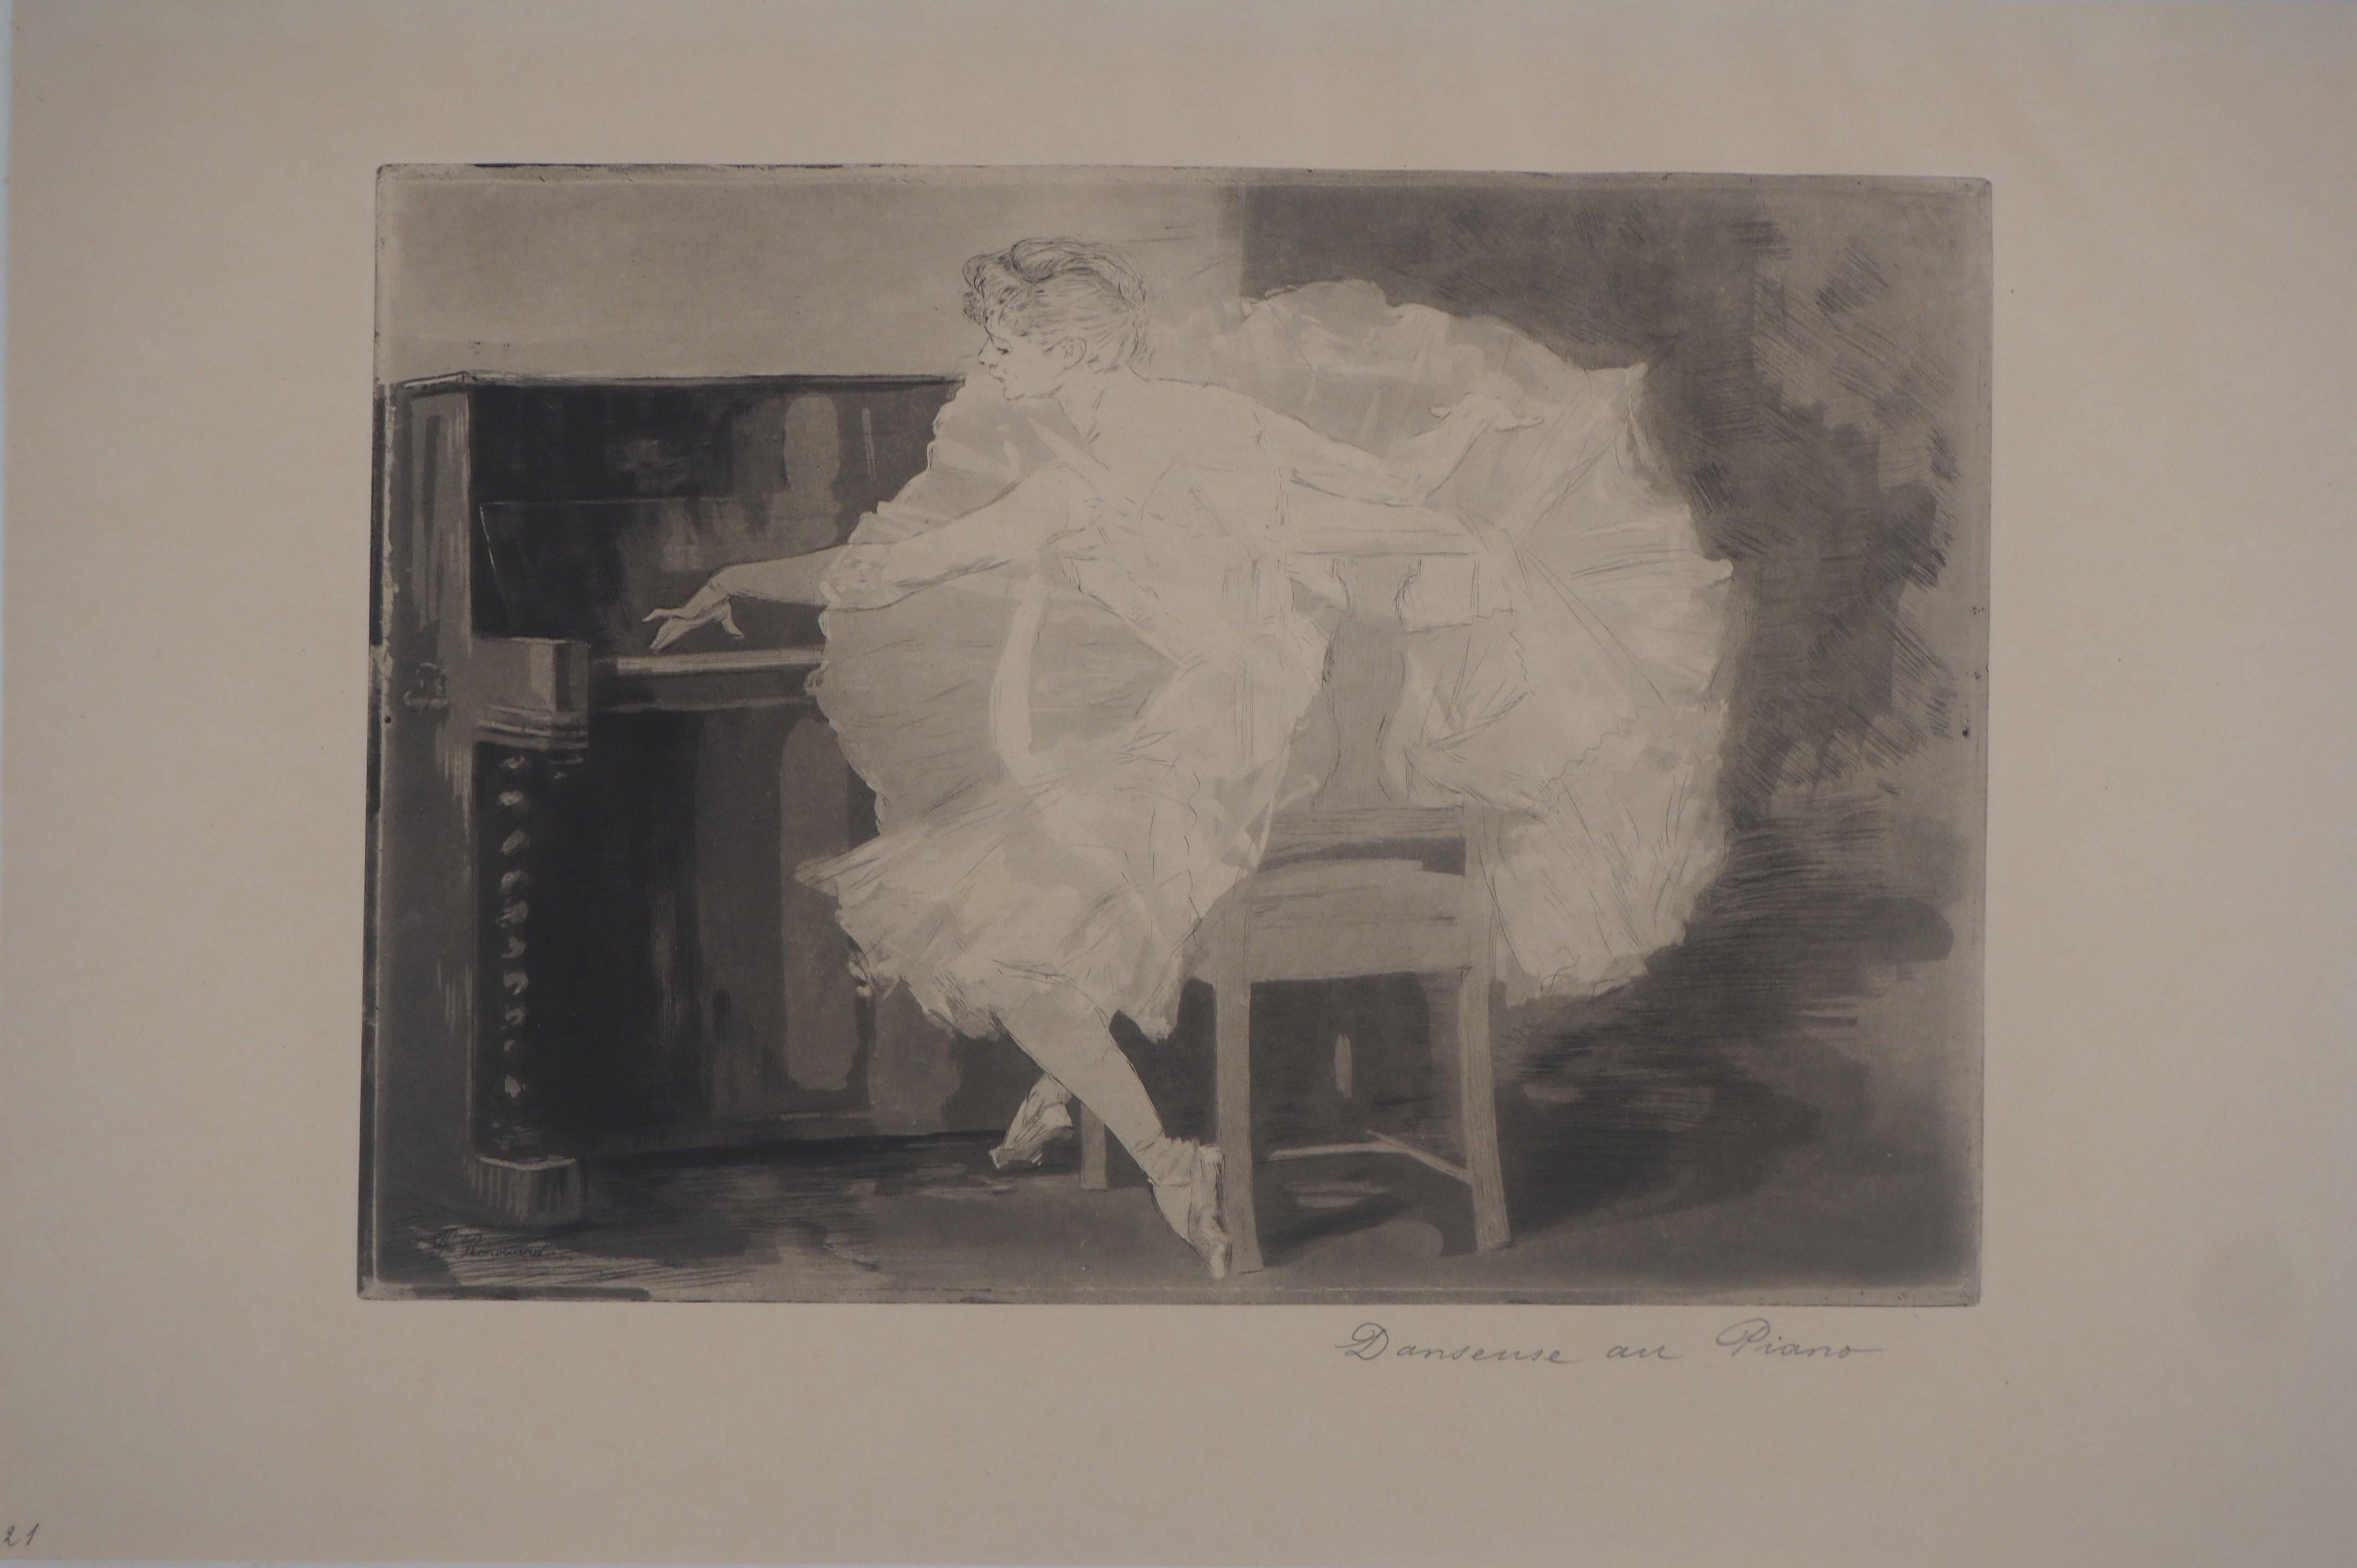 Ballerina Playing the Piano - Original etching, Signed